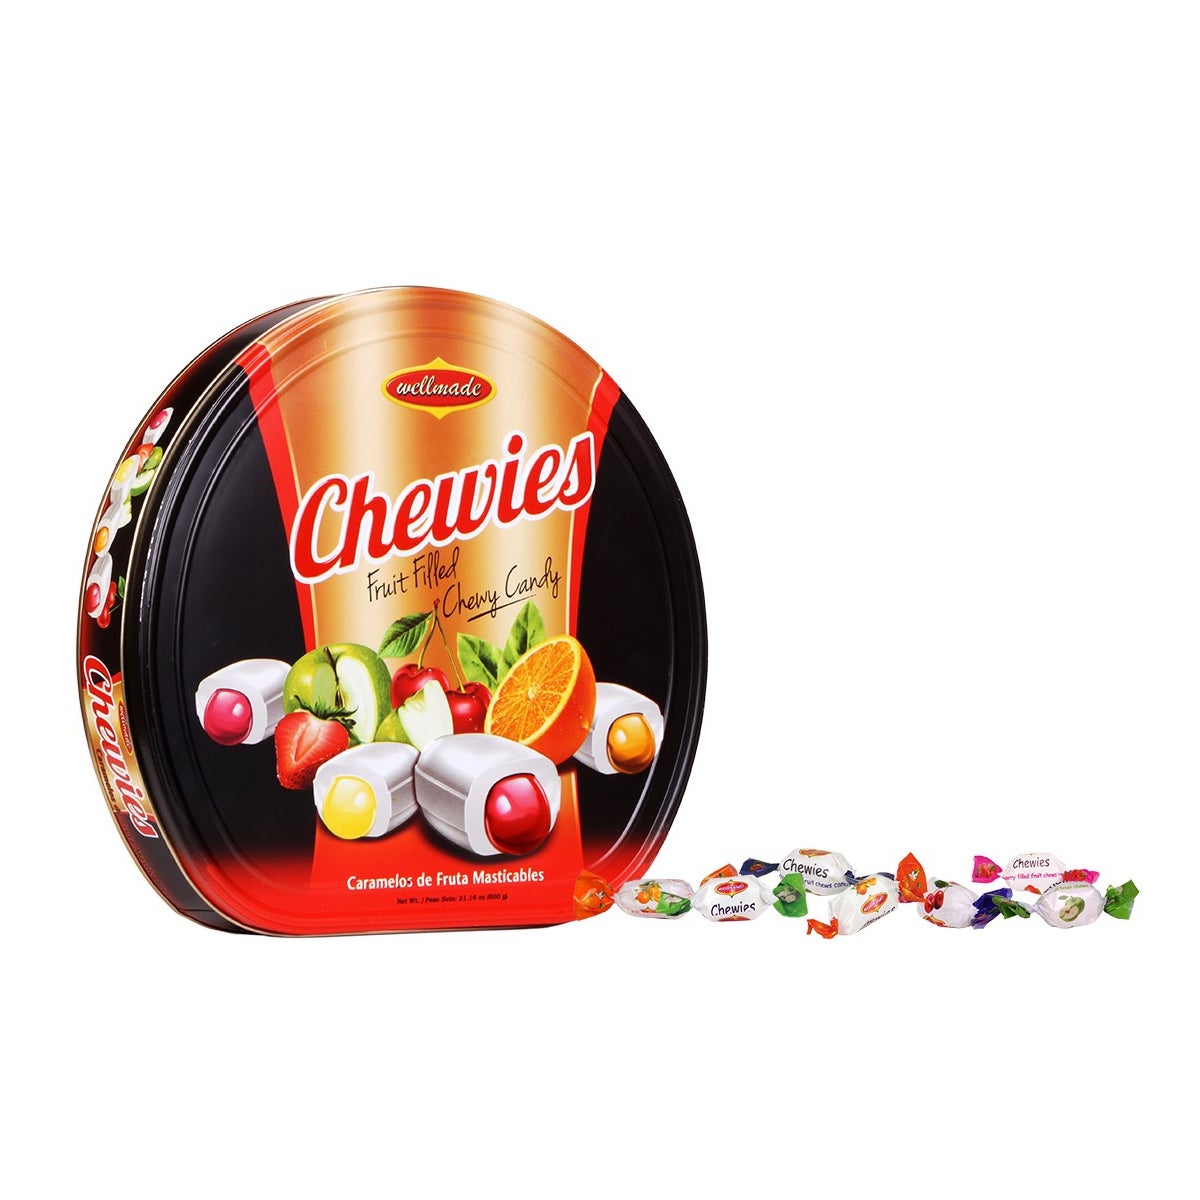 Wellmade Chewy (Assorted) Tin Box 600g x 8